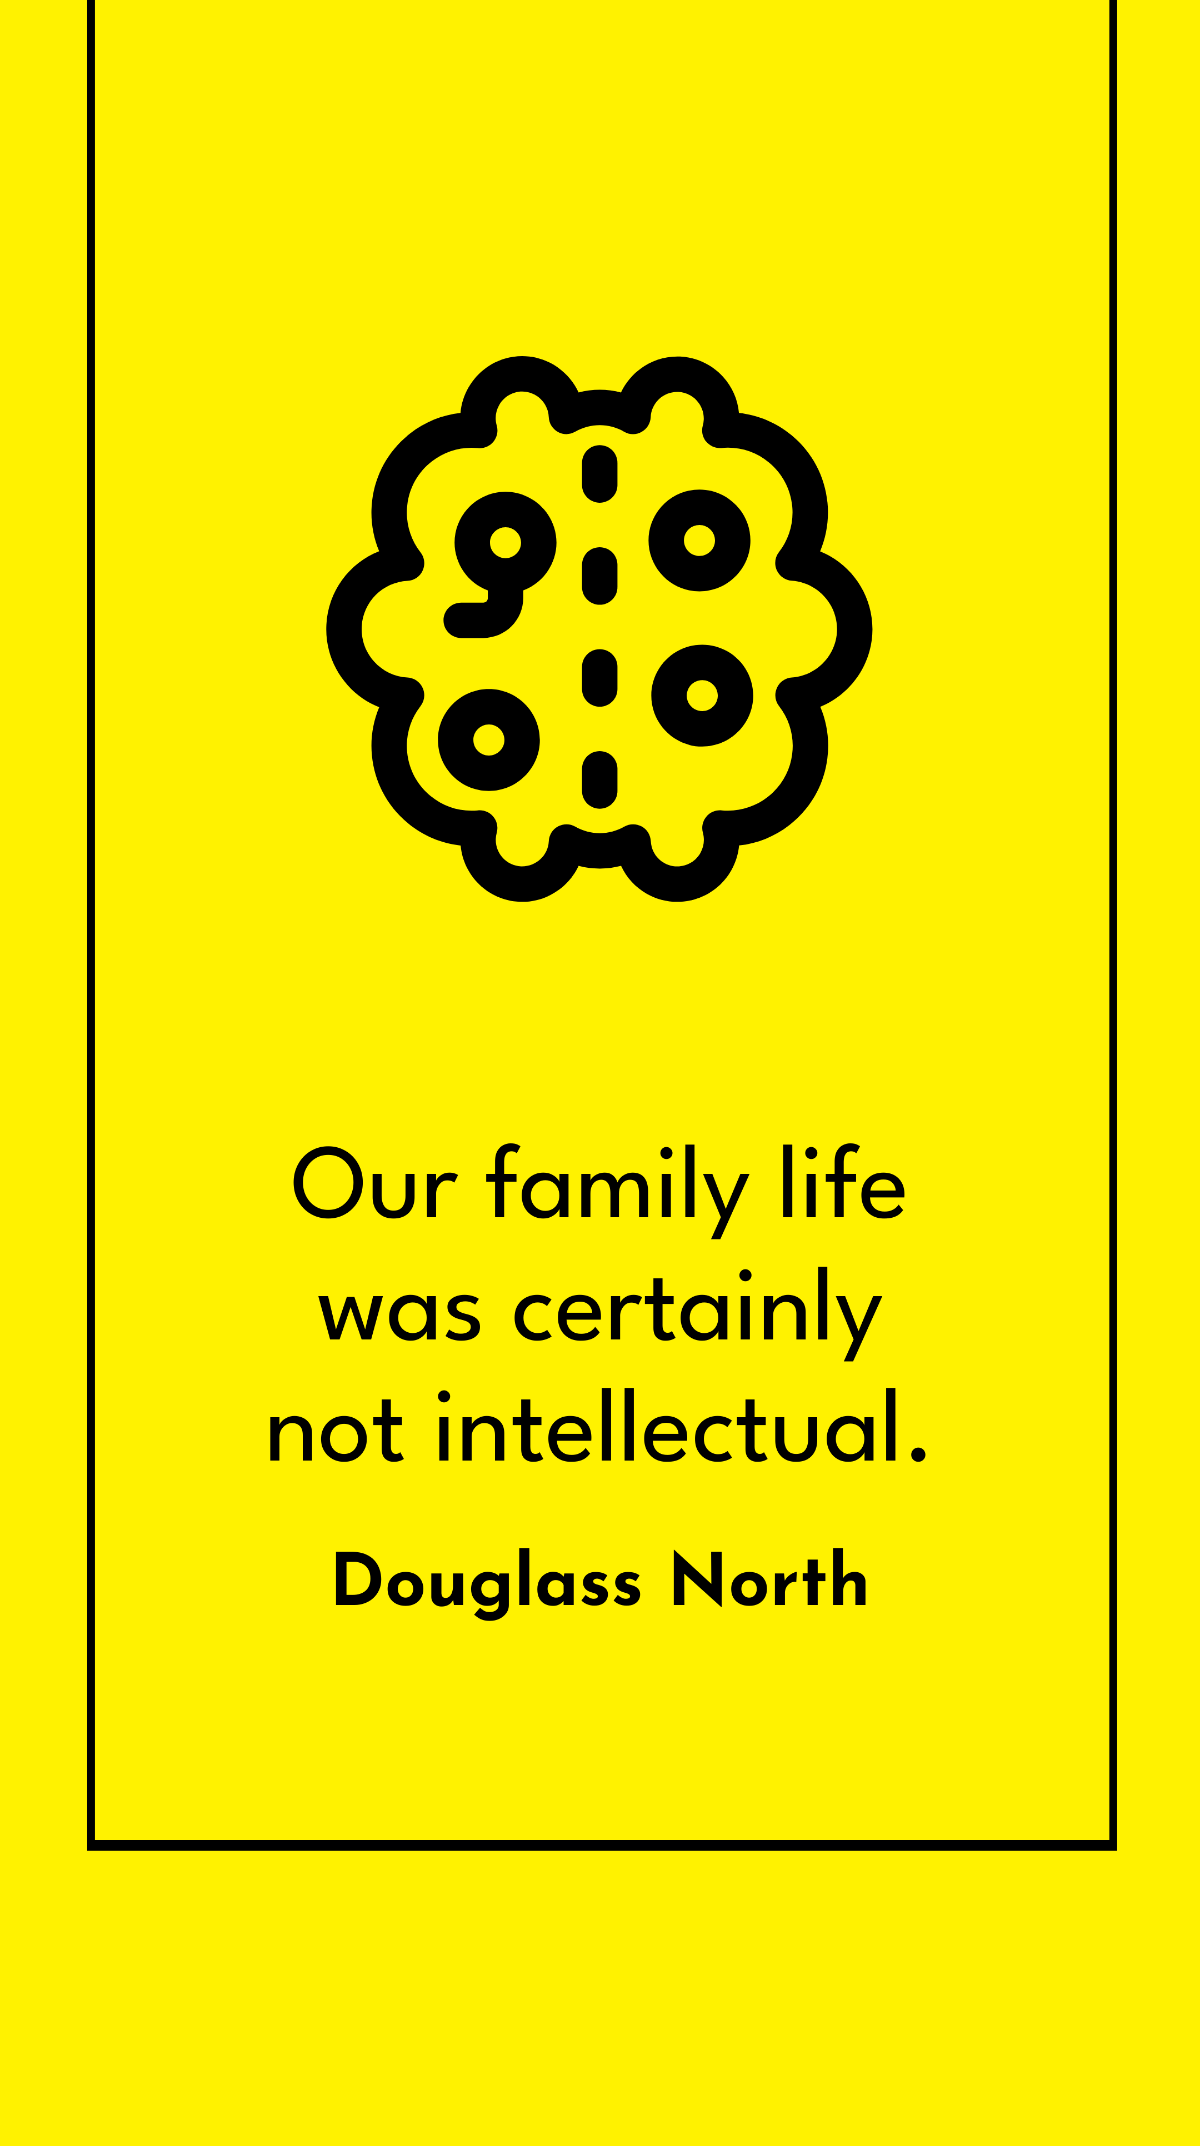 Douglass North - Our family life was certainly not intellectual.